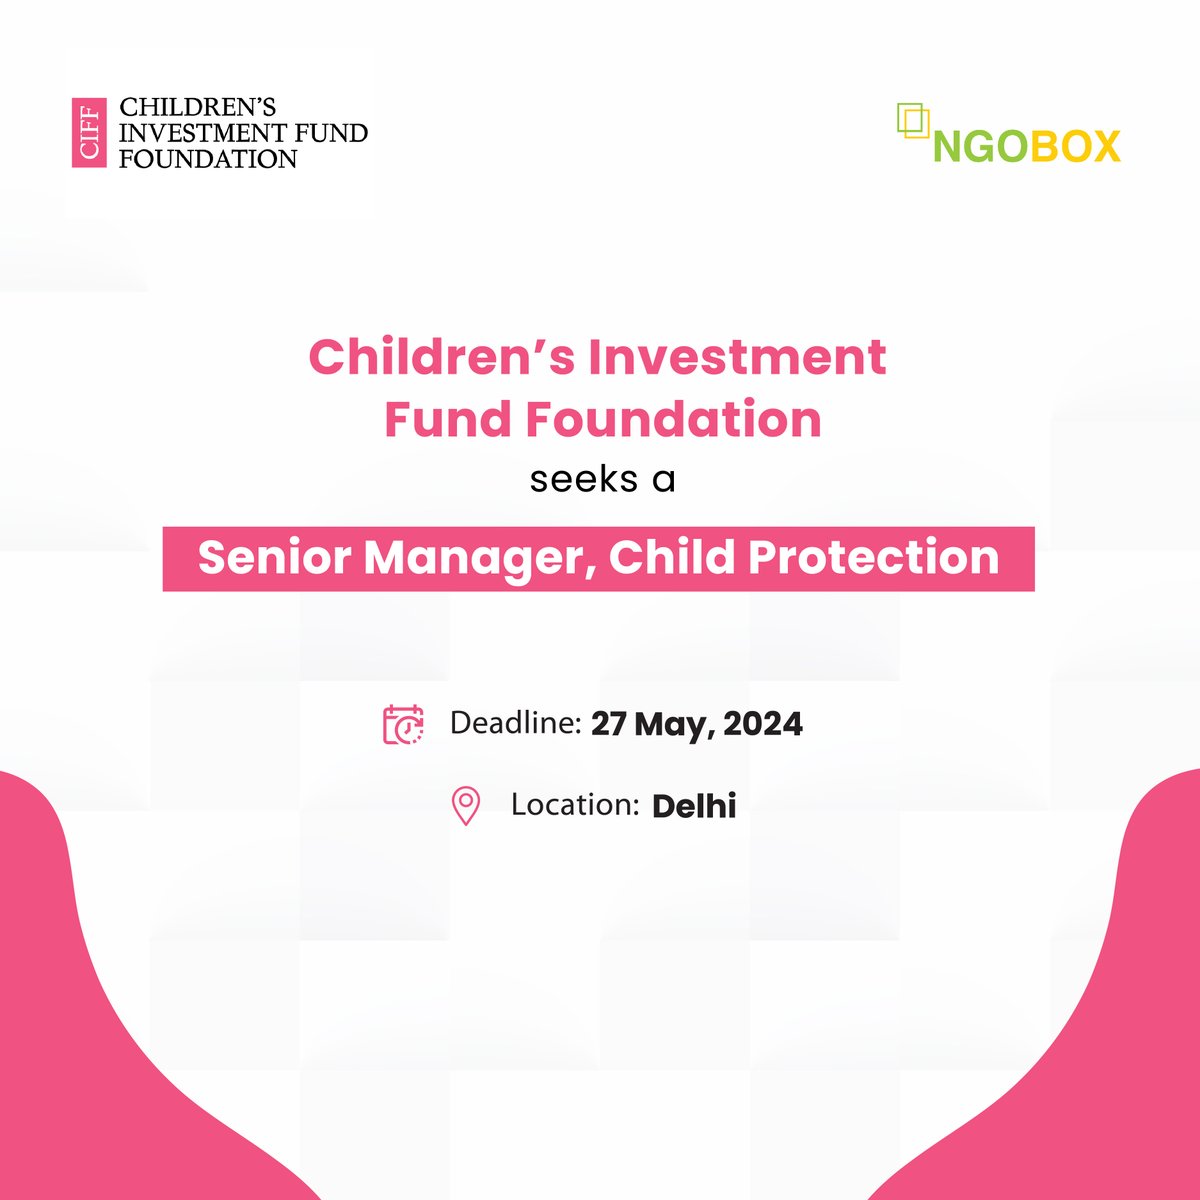 CIFF is looking for a Senior Manager in Child Protection. If you have experience in child protection programs and can communicate effectively about these initiatives, we want you on our team! Apply now: ngobox.org/job-detail_Sen… #JobOpening #SeniorManager #ChildProtection #CIFF